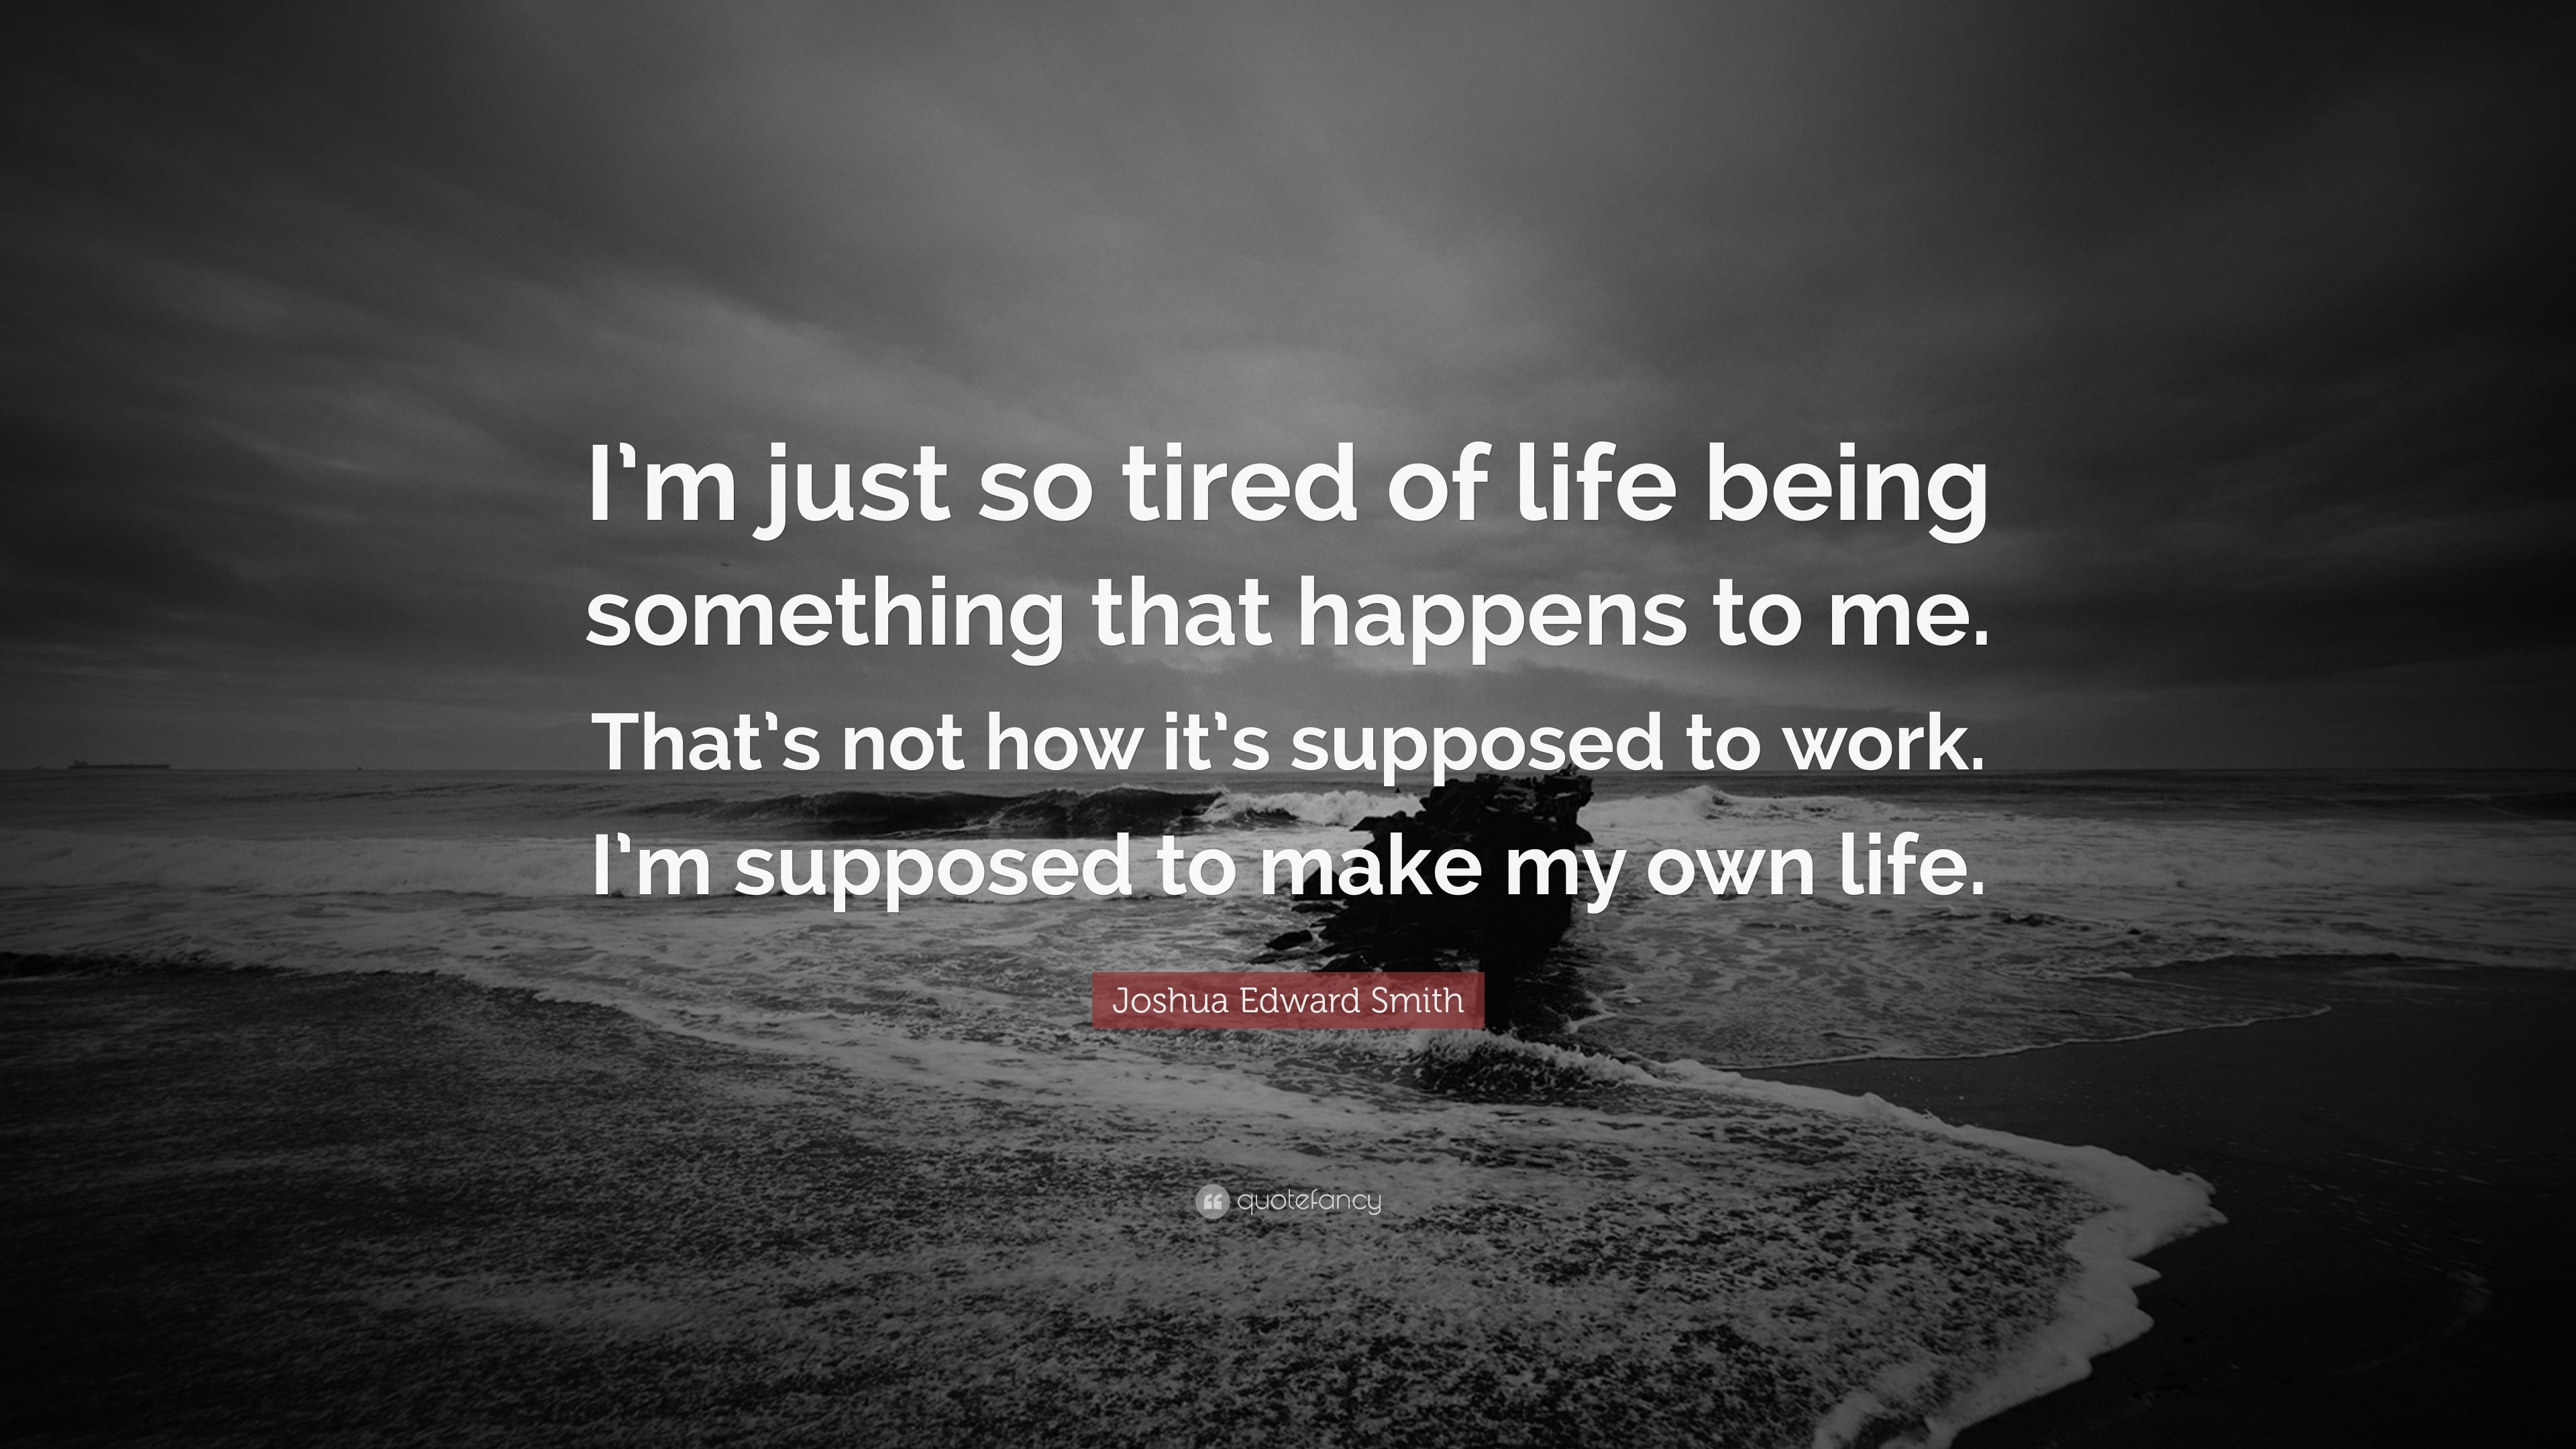 That s Not How It s Done Joshua Edward Smith Quote: “I'm just so tired of life being something that  happens to me. That's not how it's supposed to work. I'm supposed to  make...”